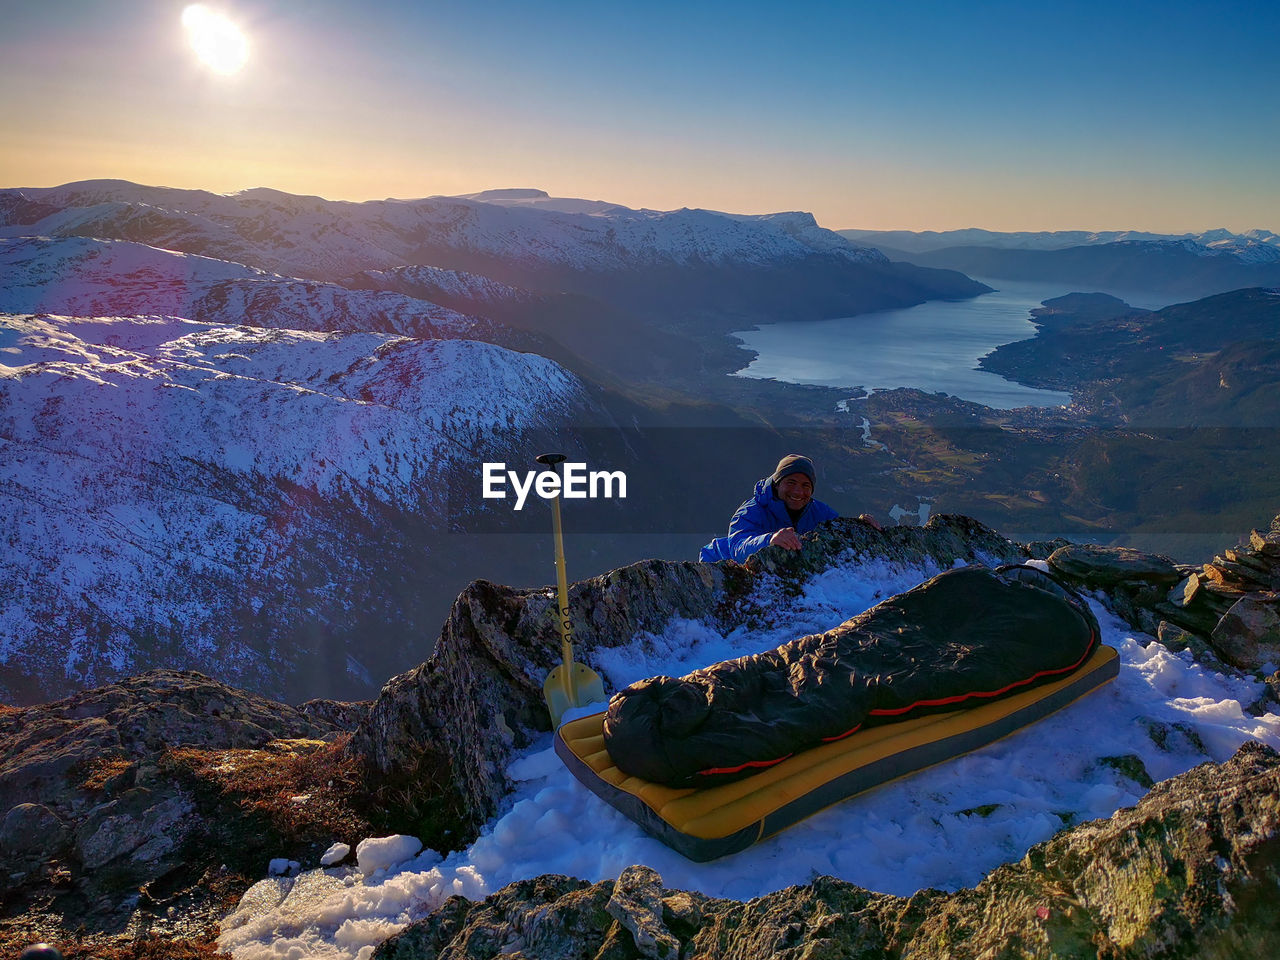 Explorer and sleeping bag on top of snow capped mountain 